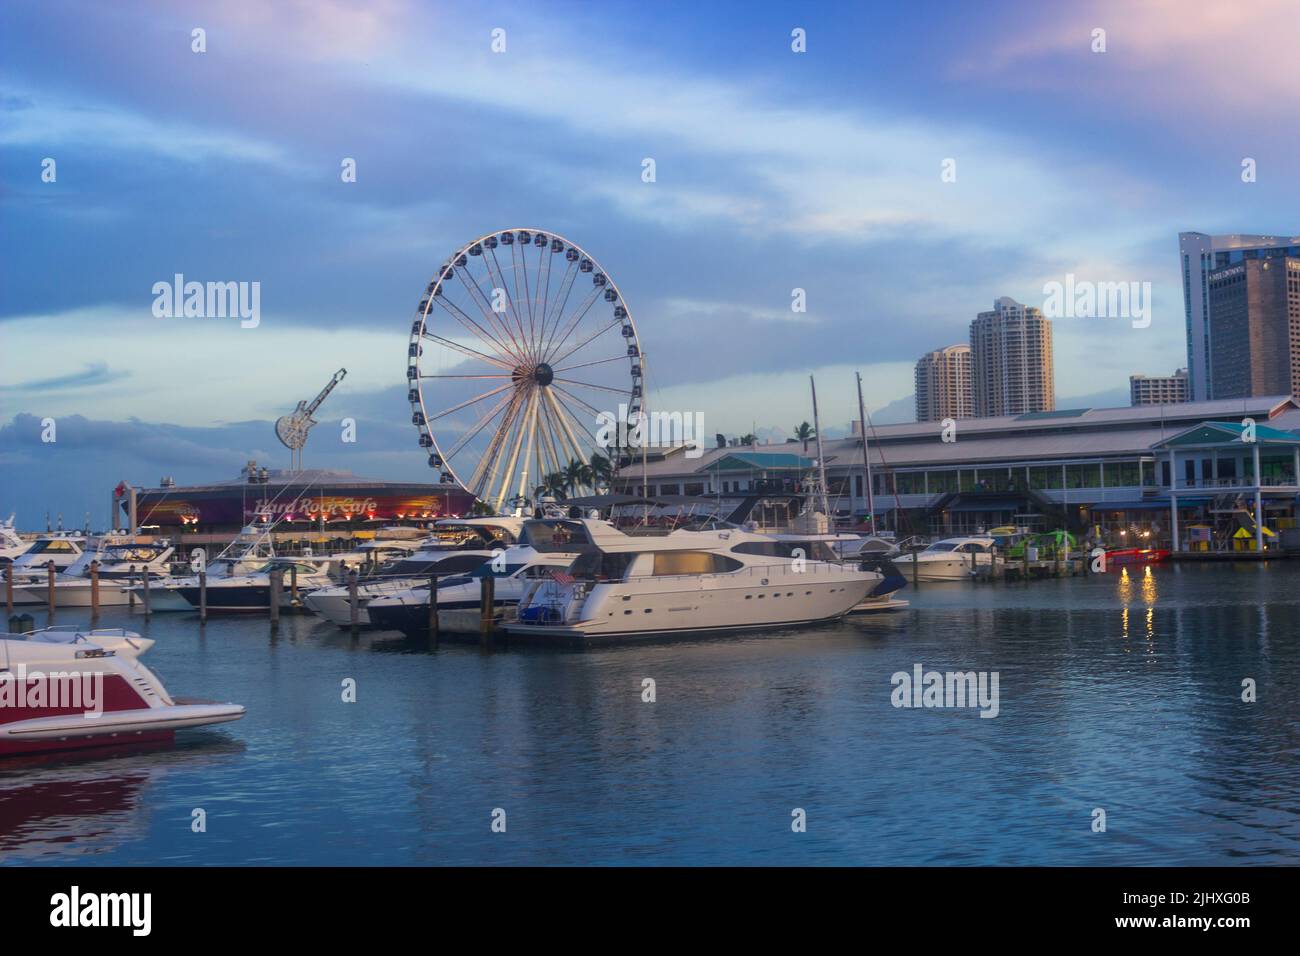 Skyview Miami Observation Wheel and Hard Rock Café in Bayside Marketplace Stock Photo